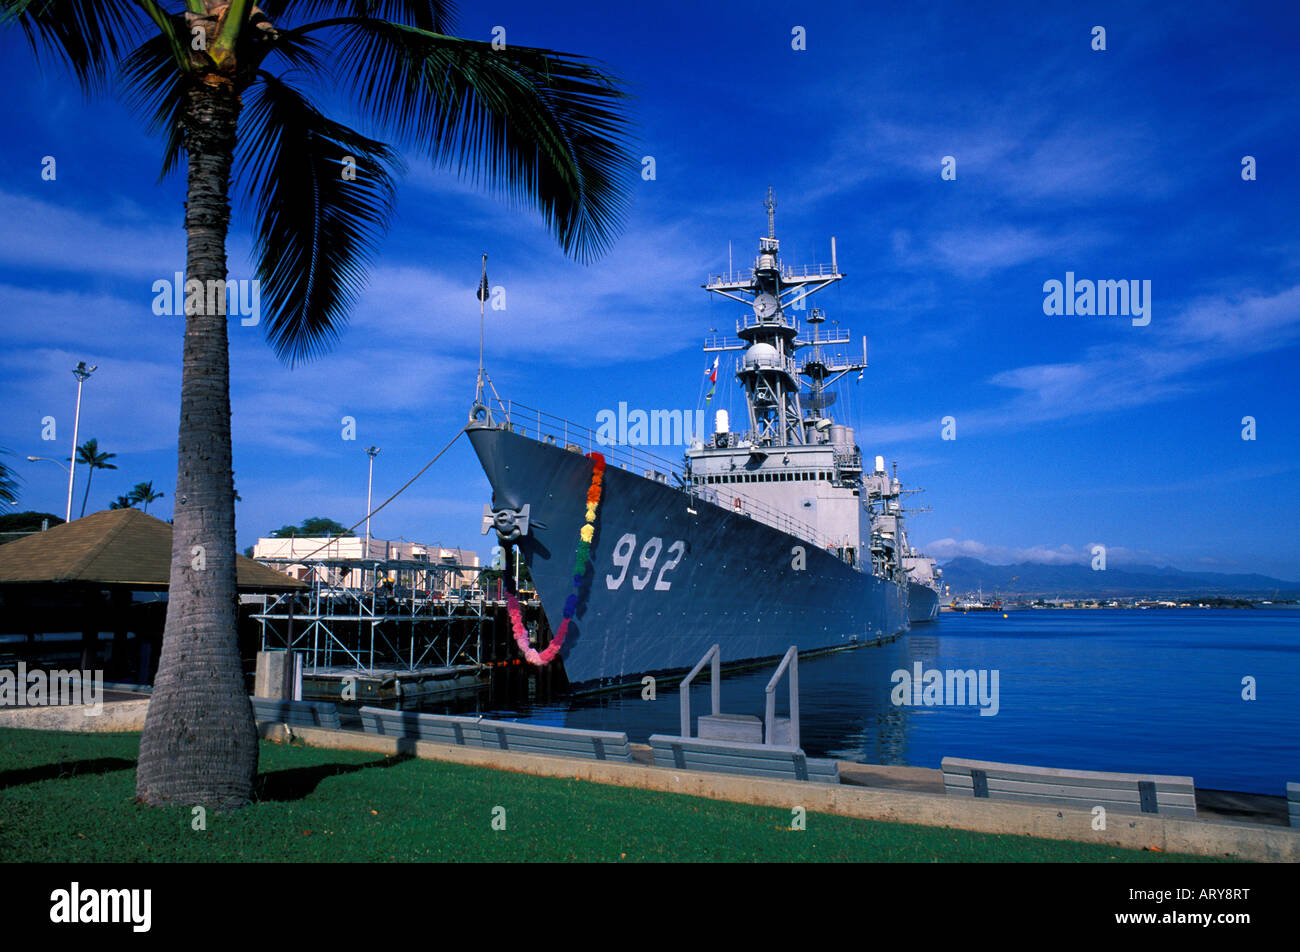 Adorned with a giant flower Lei, this naval vessel is welcomed home from a long tour at sea. Pearl harbor. Stock Photo